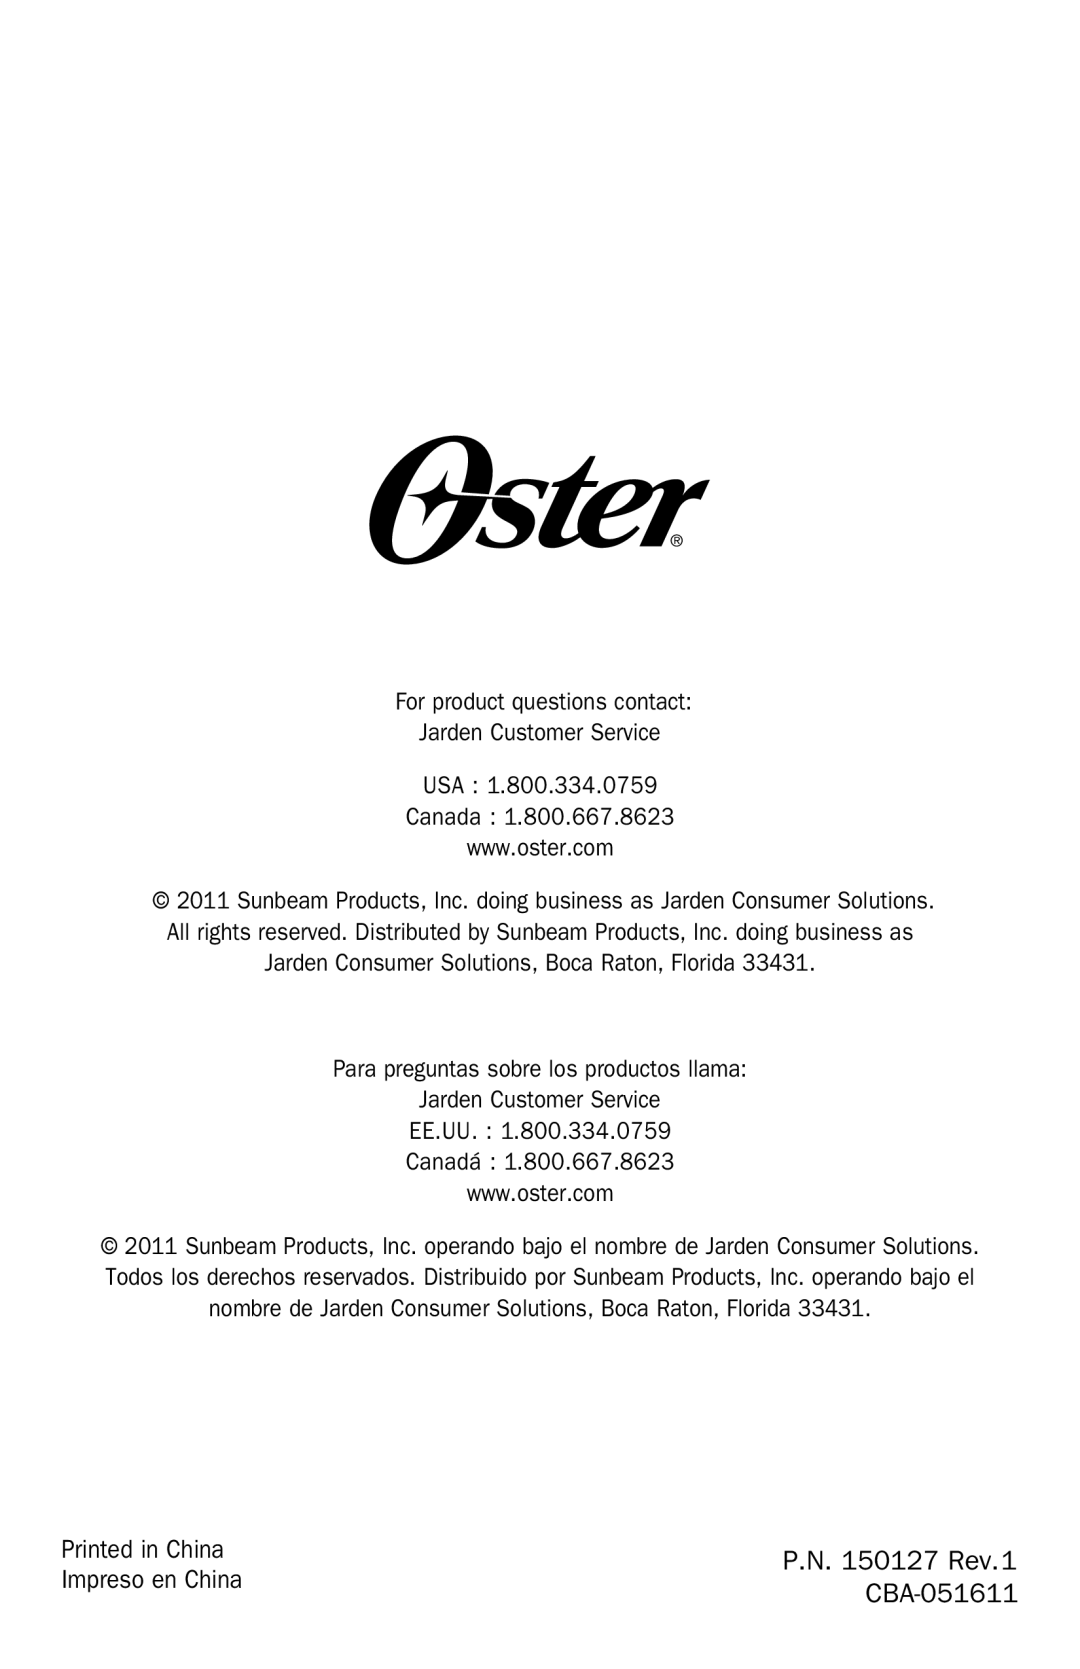 Oster TSSTTR6329, TSSTTR6330 manual P.N. 150127 Rev.1, Impreso en China, CBA-051611, For product questions contact 